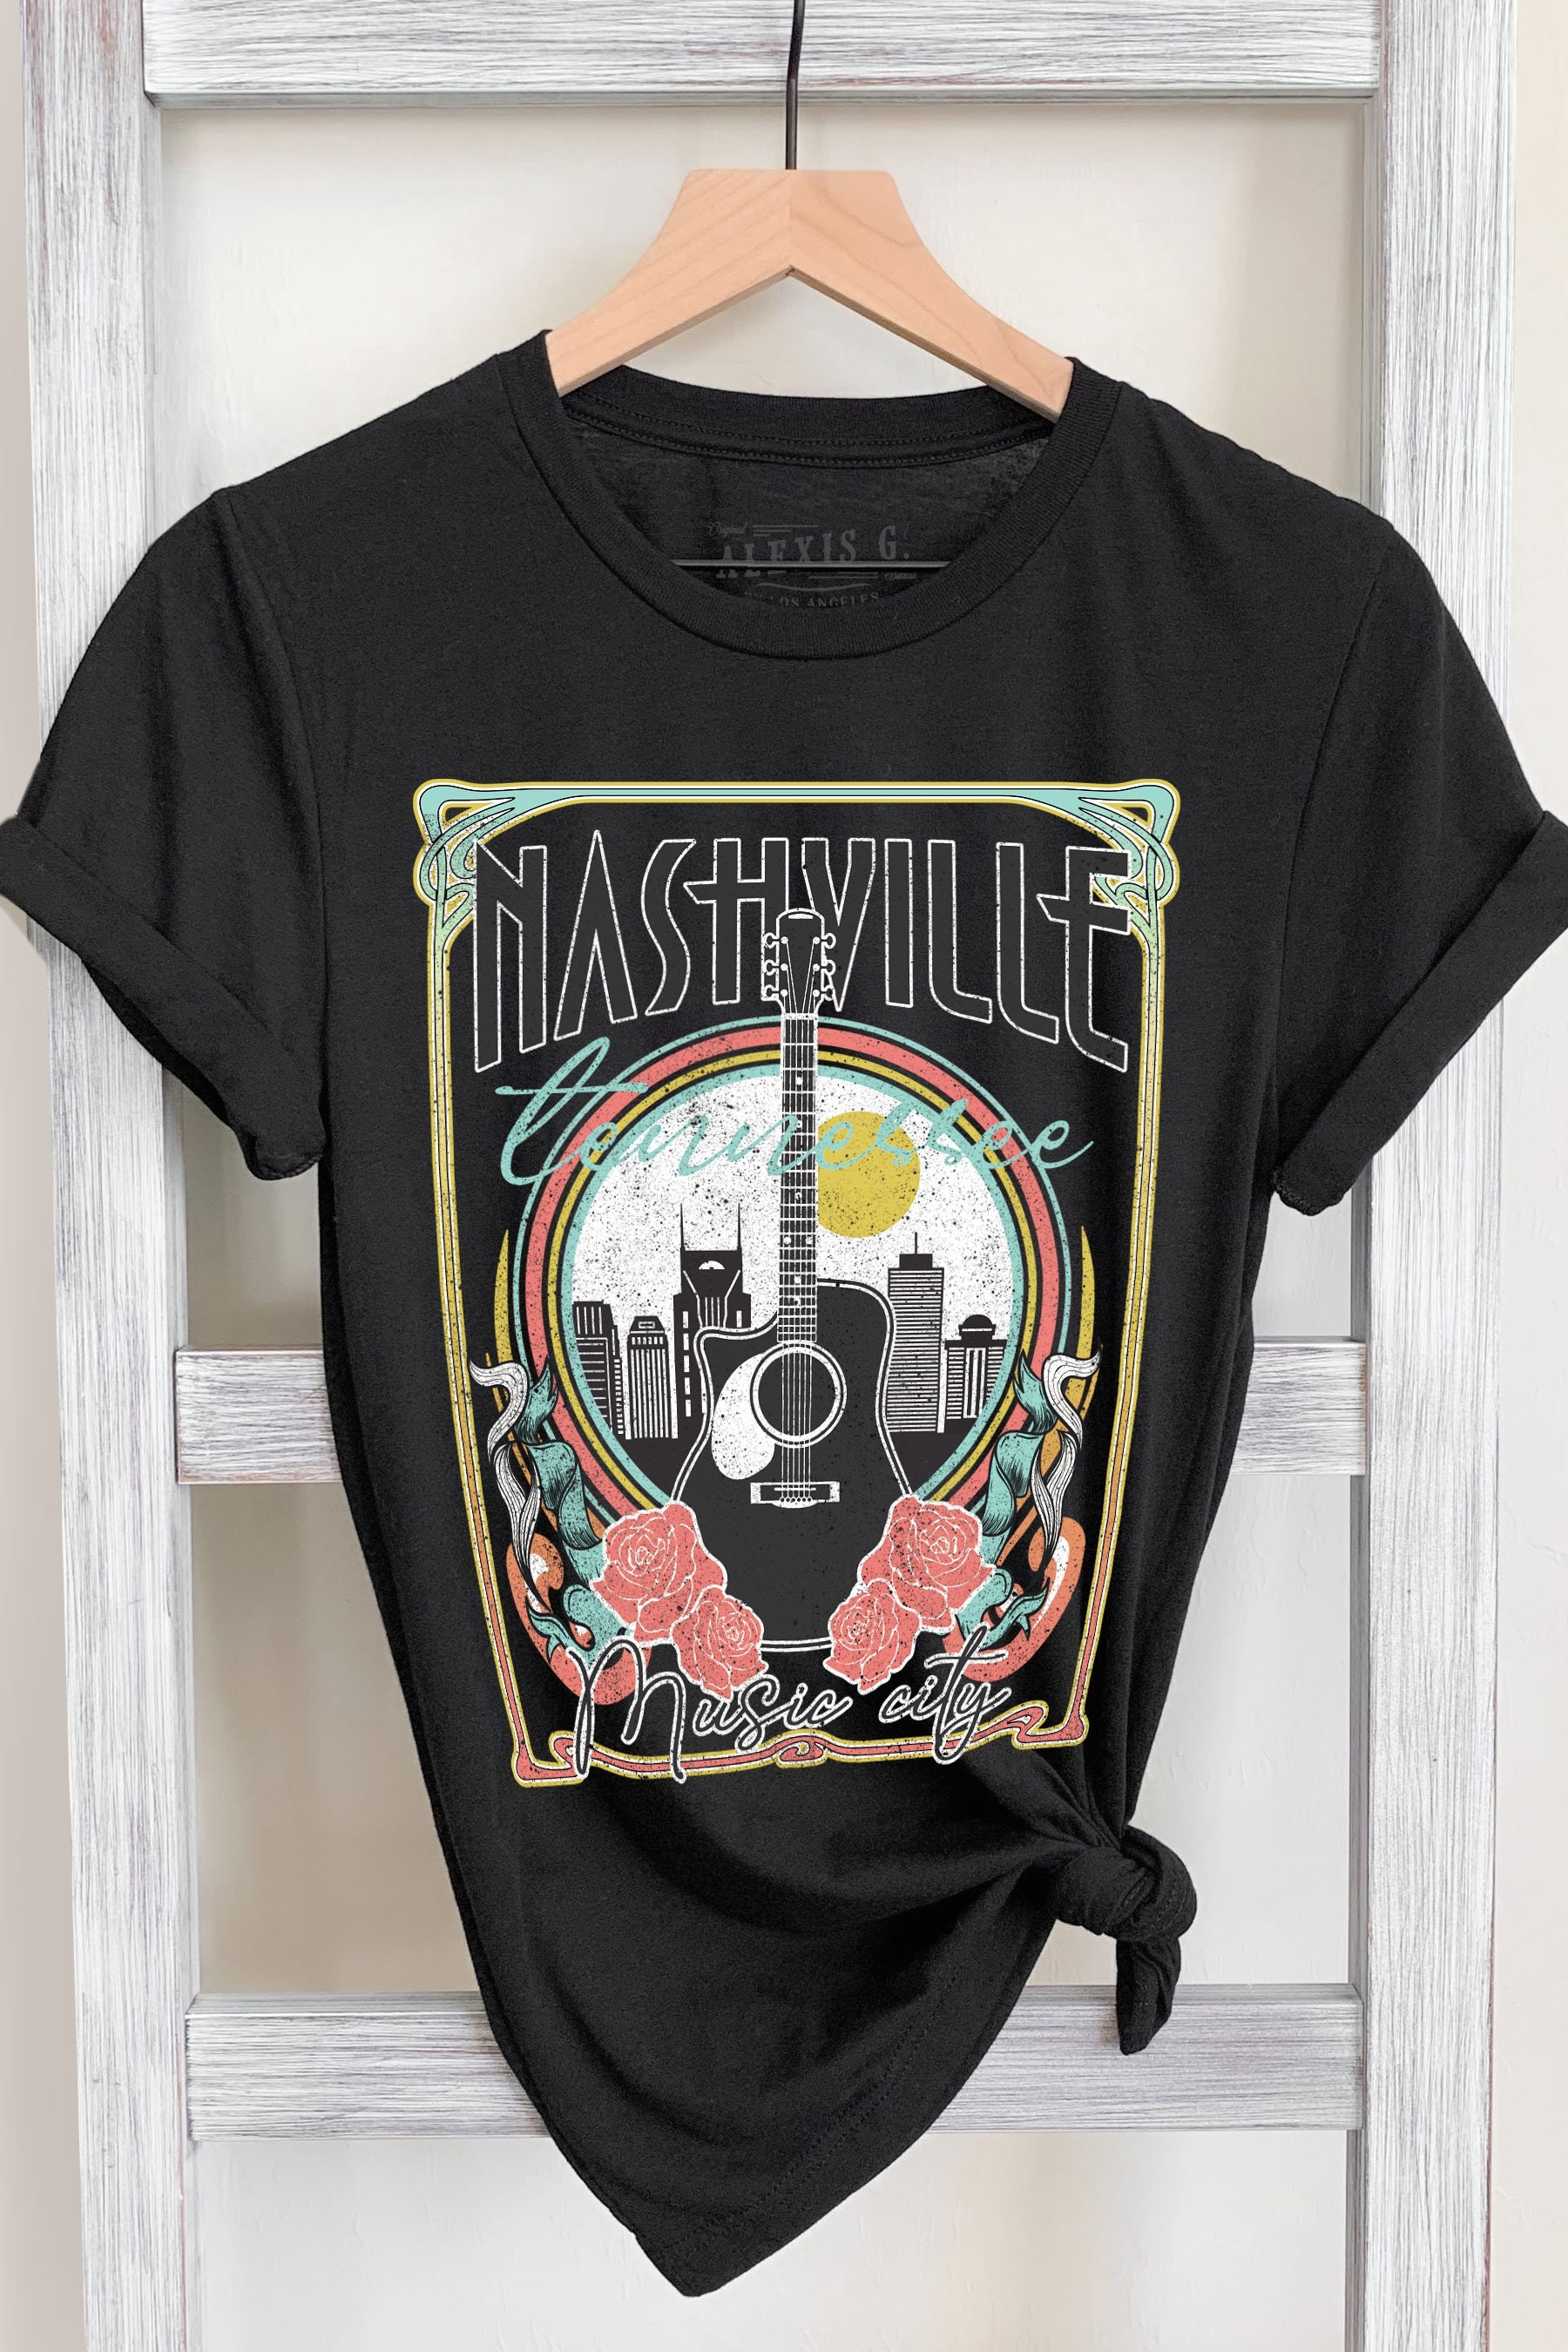 Discover Nashville Music City Graphic Tee, Country Music T Shirt, Nashville Shirt